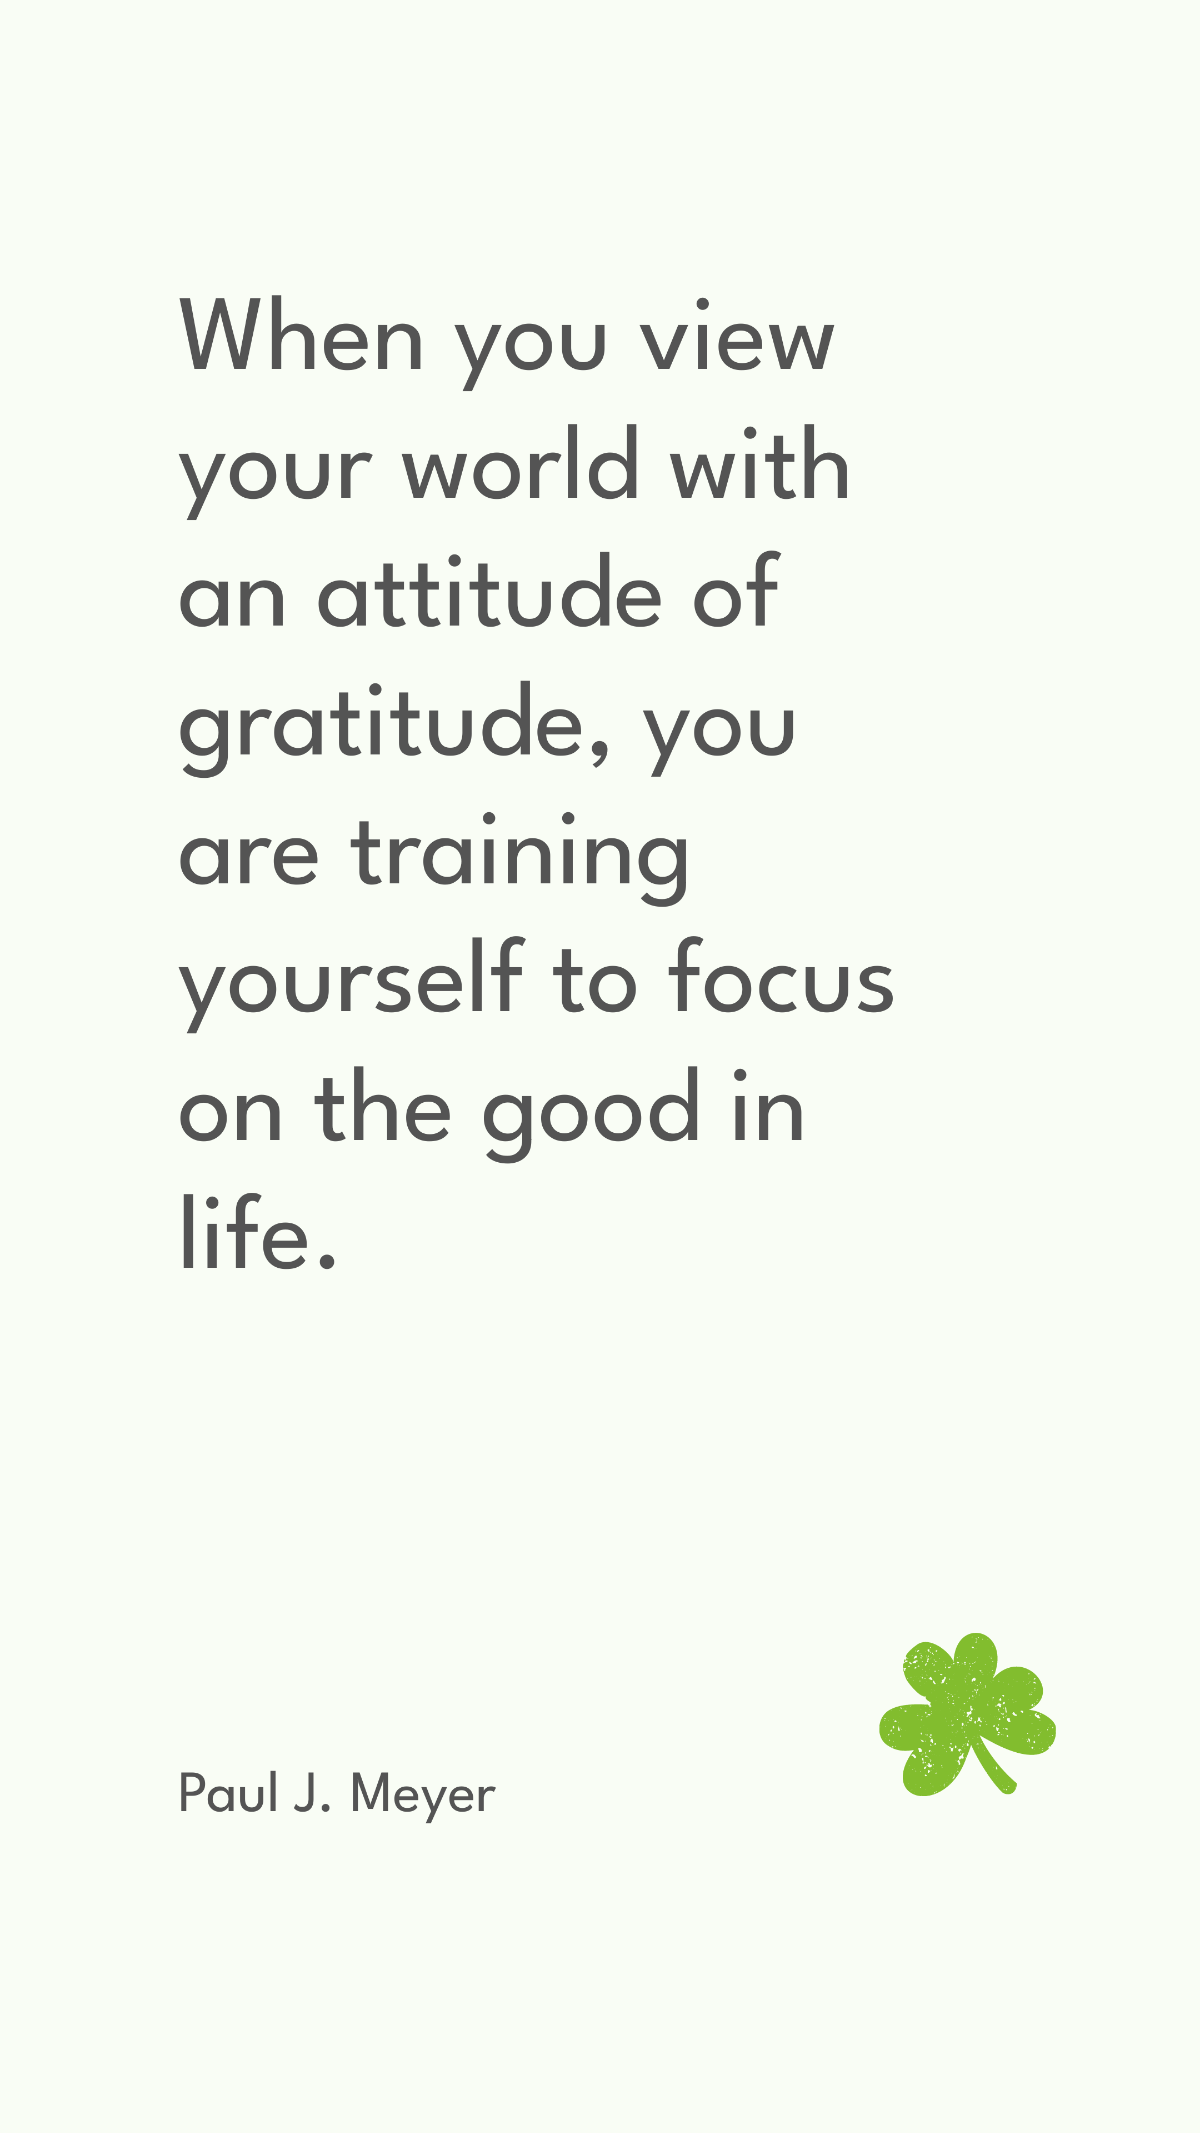 Paul J. Meyer - When you view your world with an attitude of gratitude, you are training yourself to focus on the good in life.